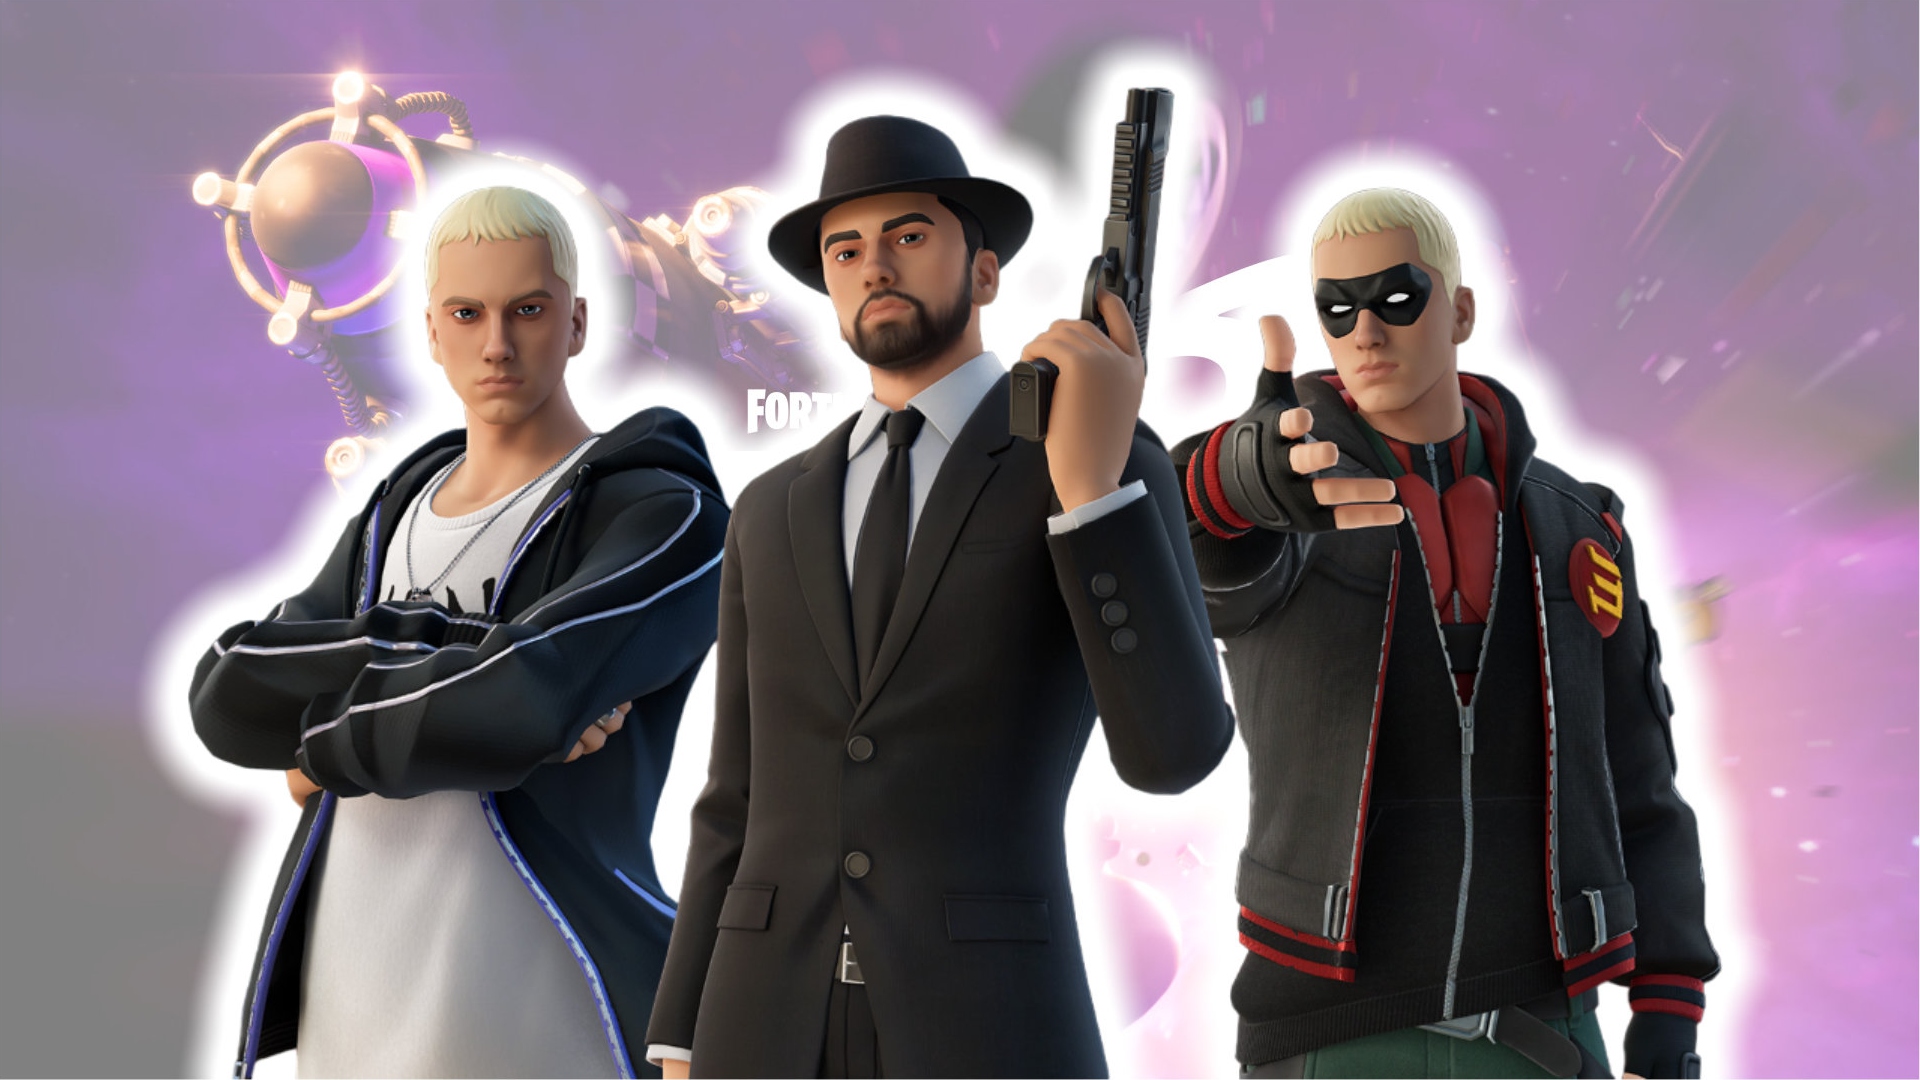 Lose yourself in Fortnite's The Big Bang event with Eminem